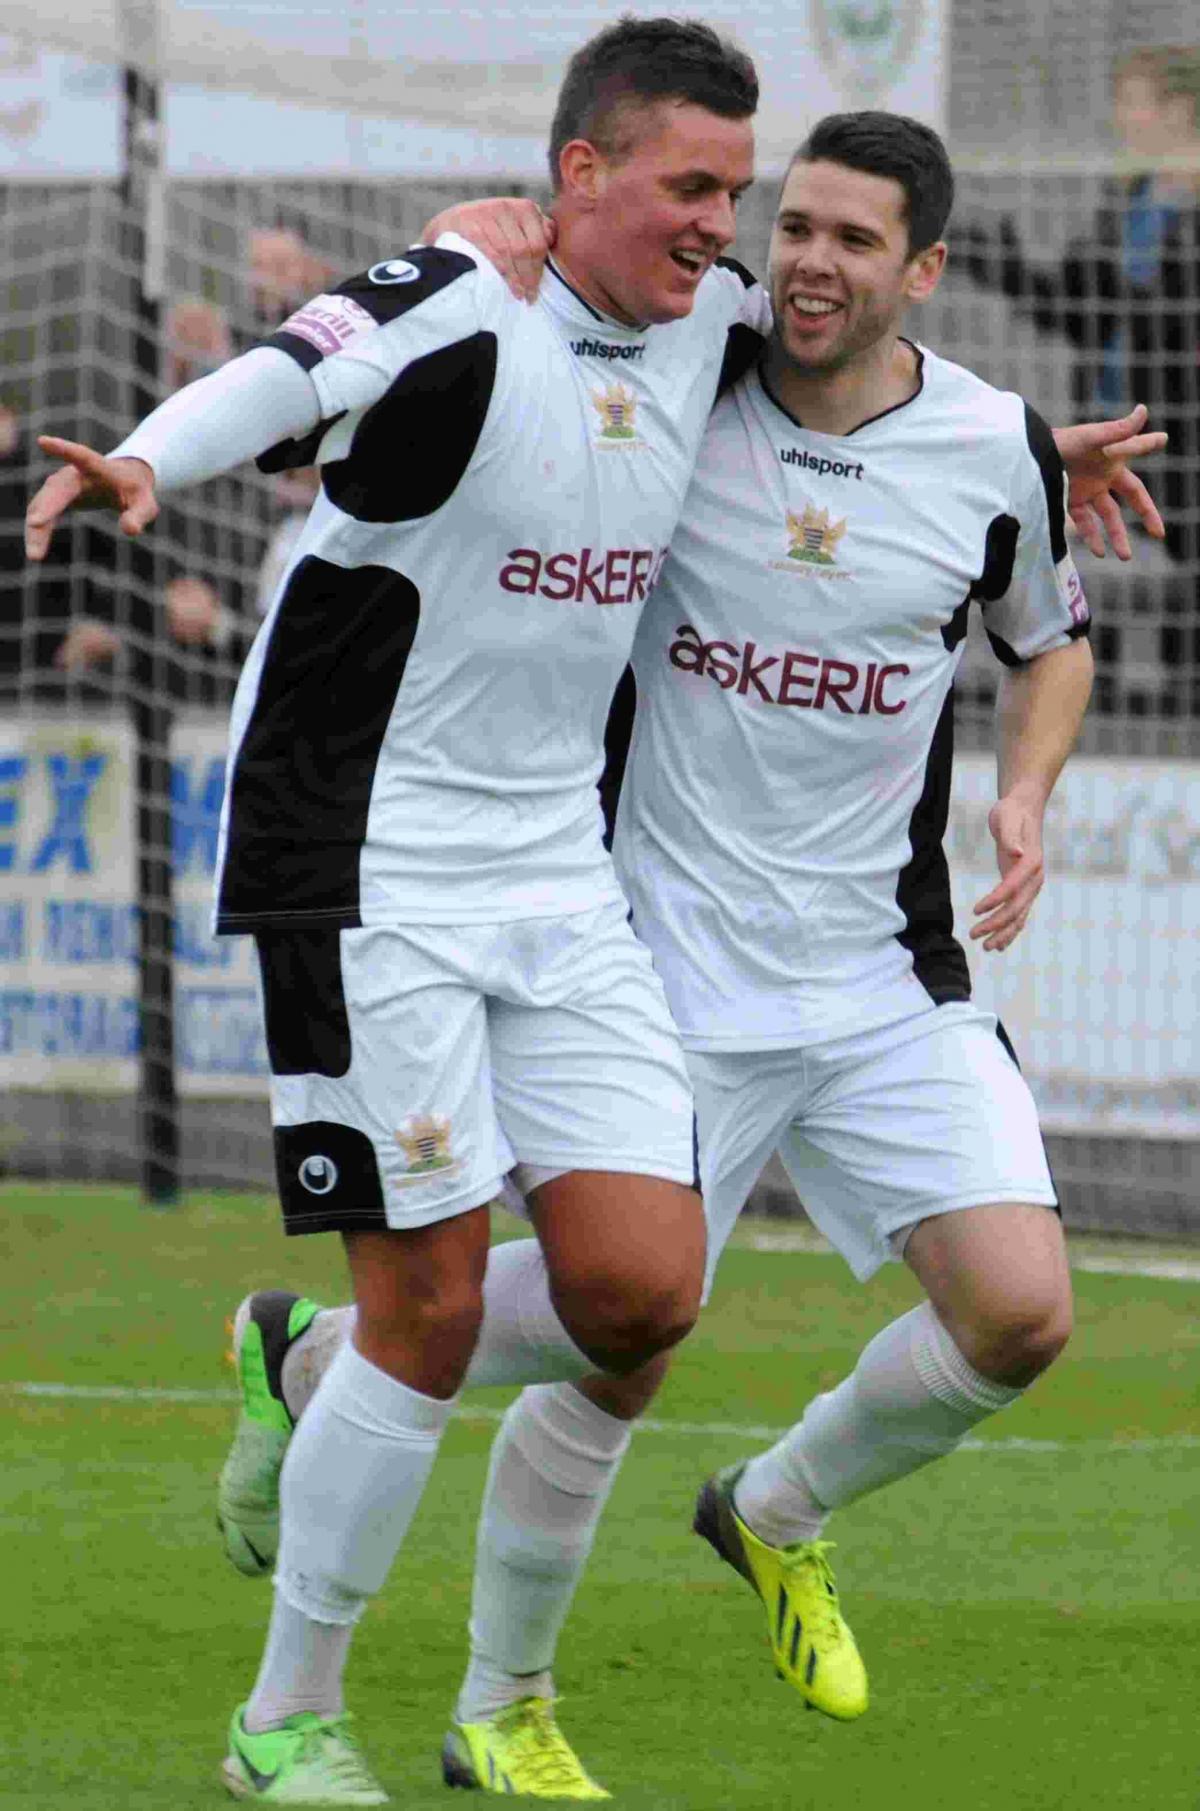 Salisbury beat Dartford 4-2 in the first round of the FA Cup.